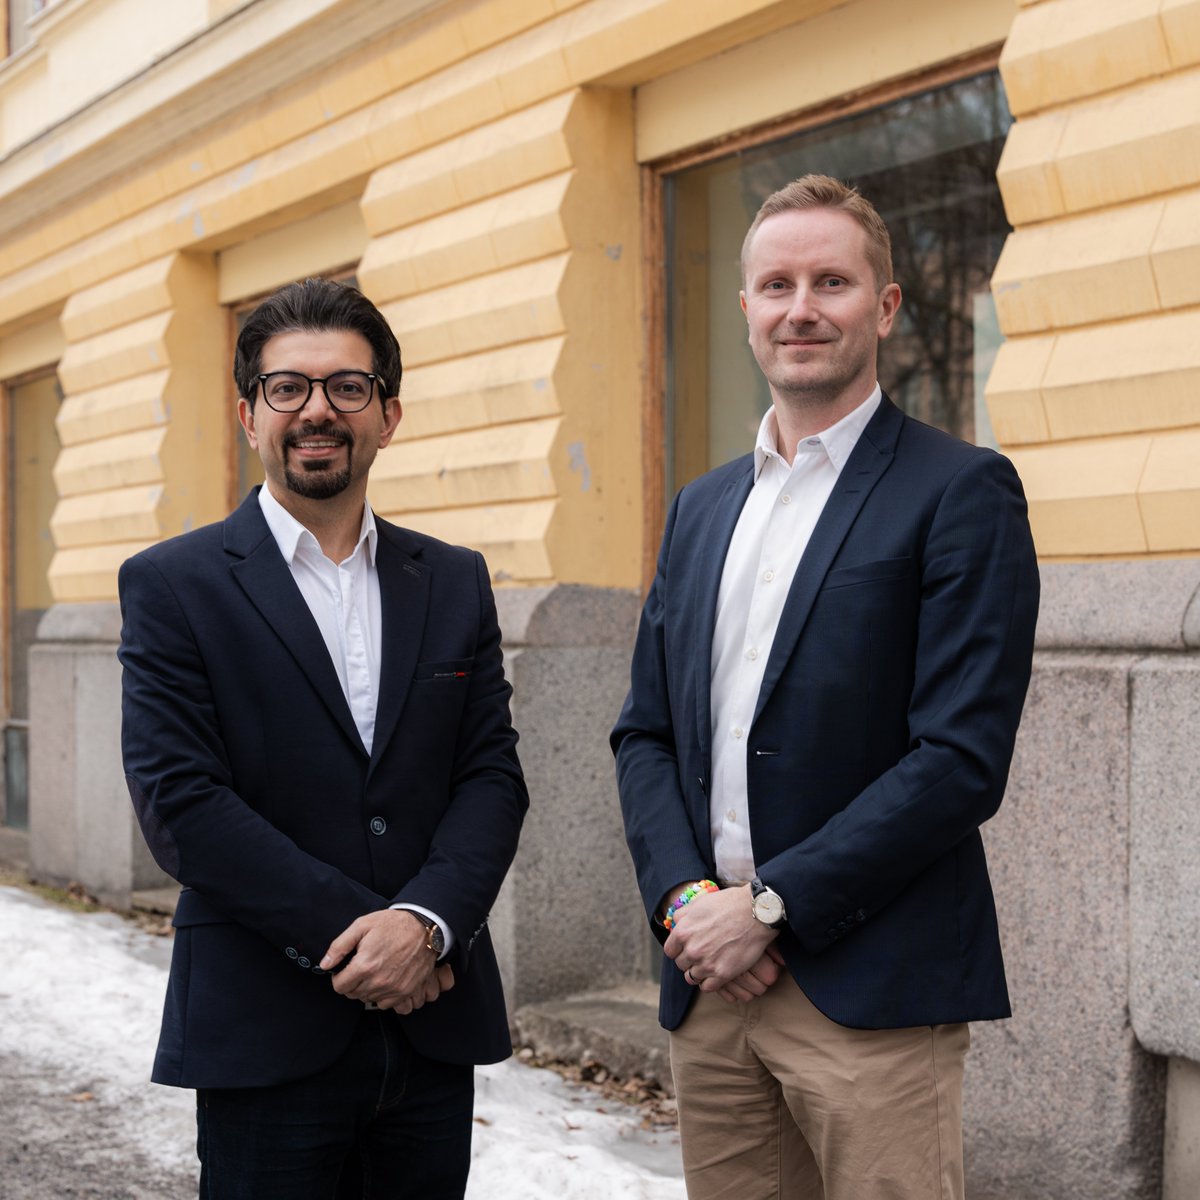 In addition, the University of Vaasa granted two honorary mentions for excellent science communication to Professor Sami Vähämaa & Professor @MiadShafiekhah. The awards were given at the Research Exhibition on Energy at #EnergyWeek.